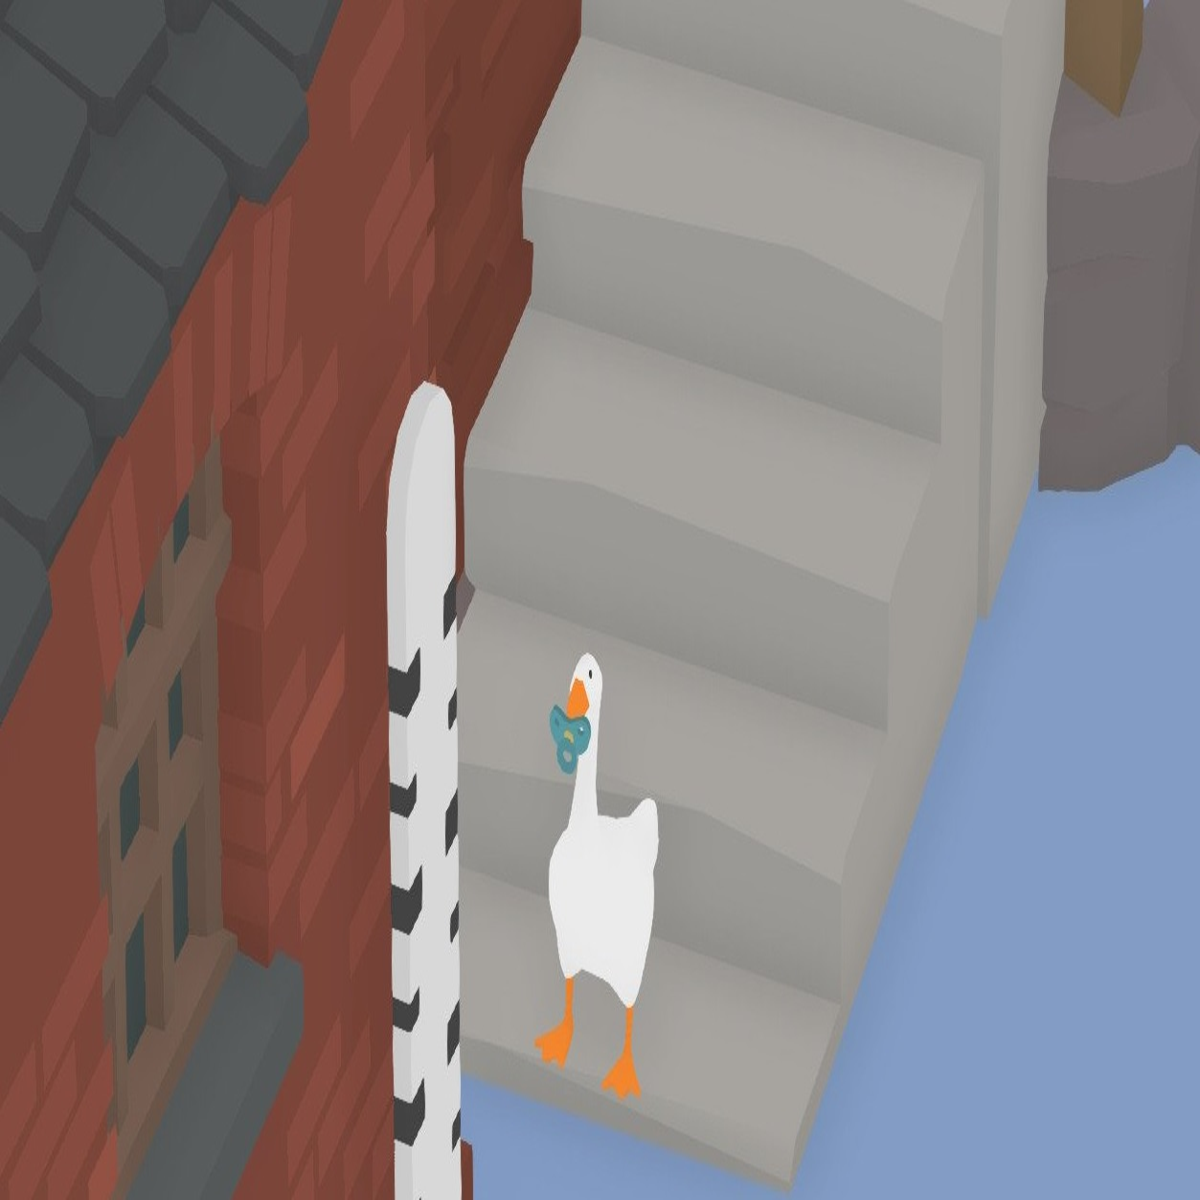 Untitled Goose Game is getting a free two-player update; also